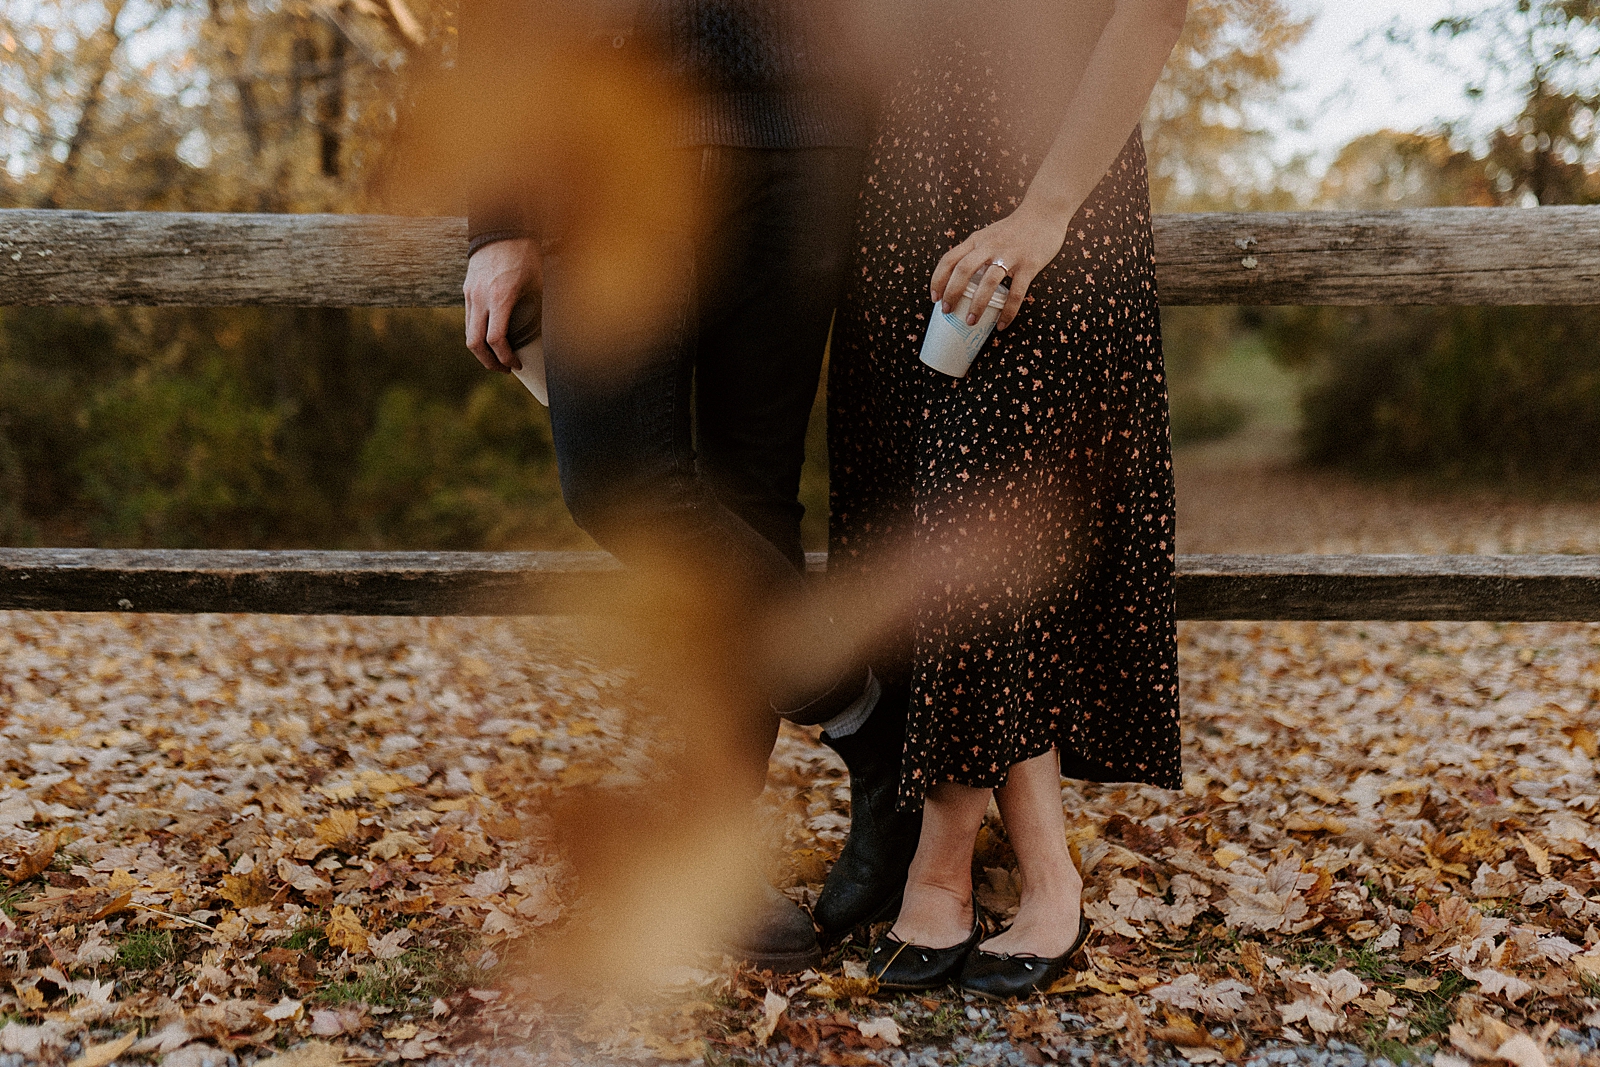 Portrait of lower half of couple standing on fall ground with leafs